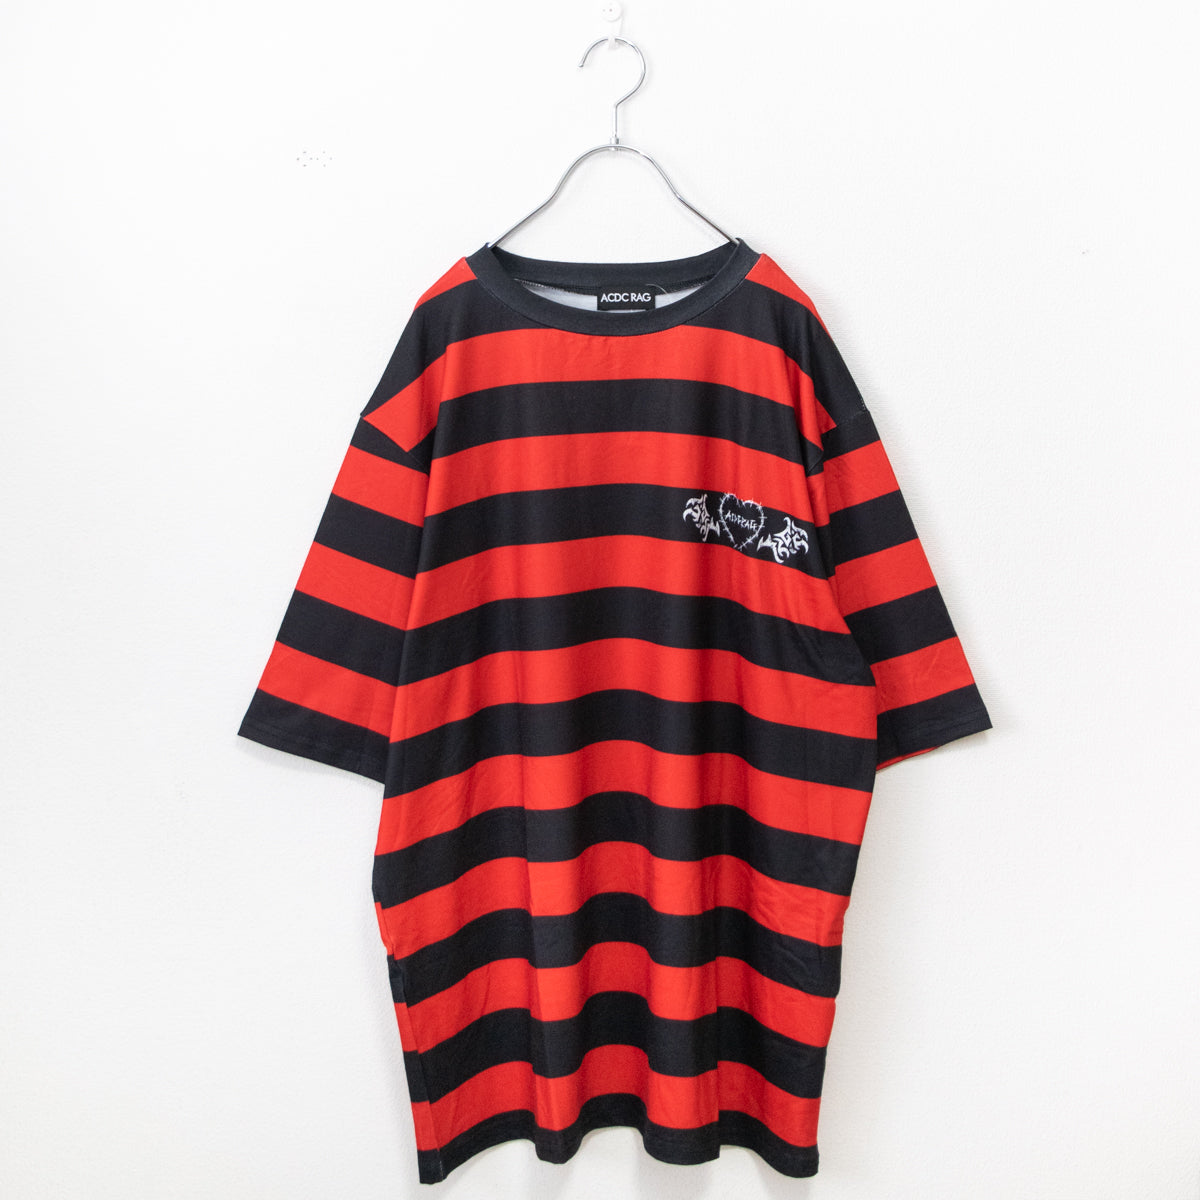 ACDC RAG WING HEART BIG Tシャツ BLACK/RED ボーダー RED レッド 赤